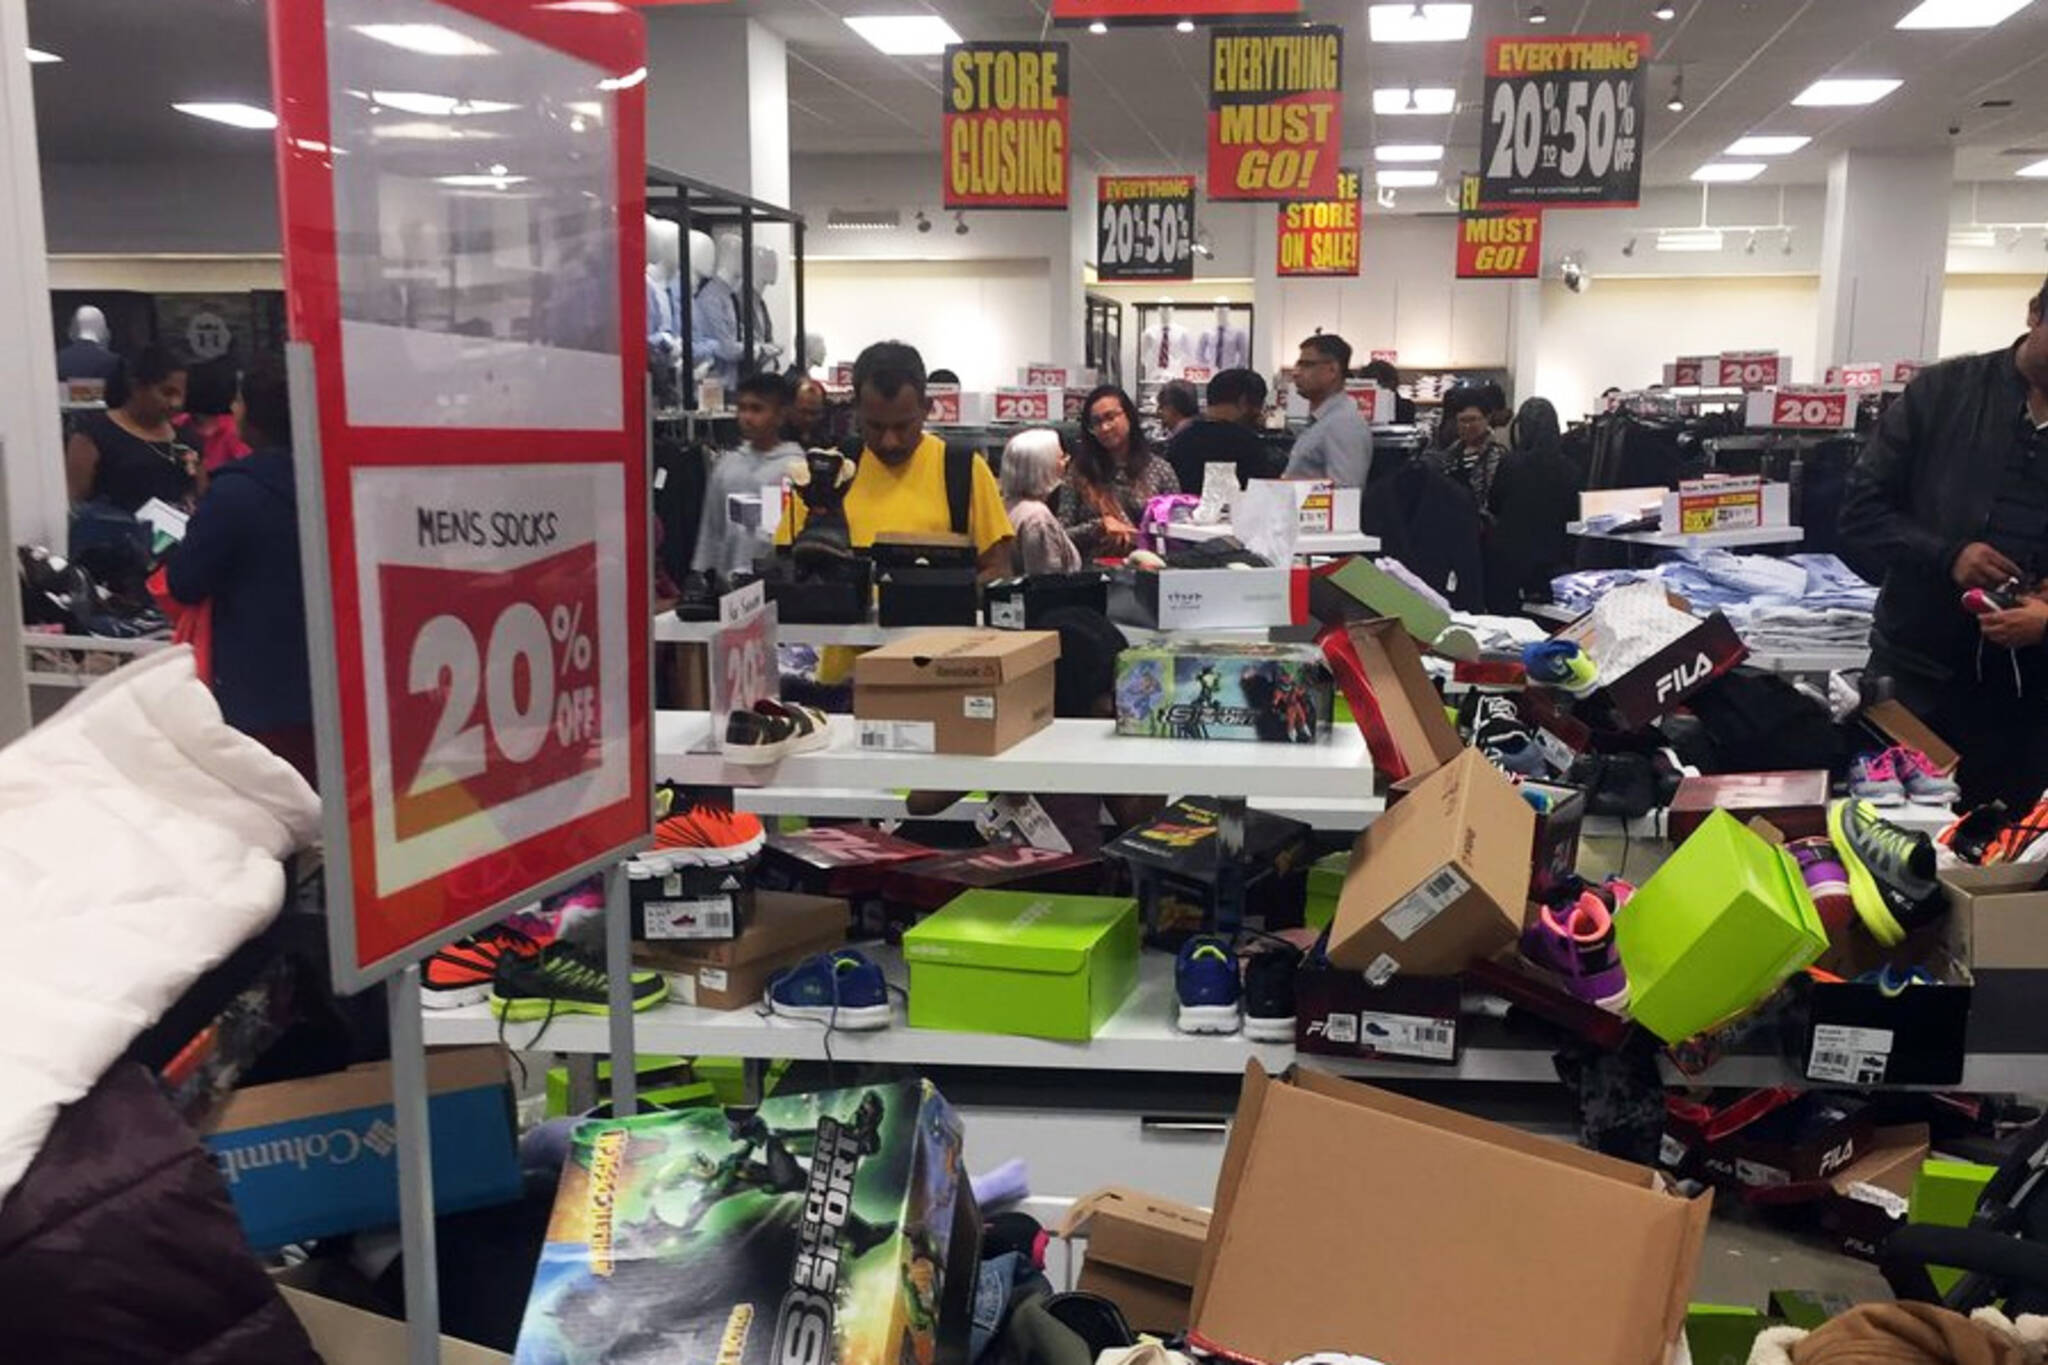 Sears liquidation sales lead to total chaos in Toronto